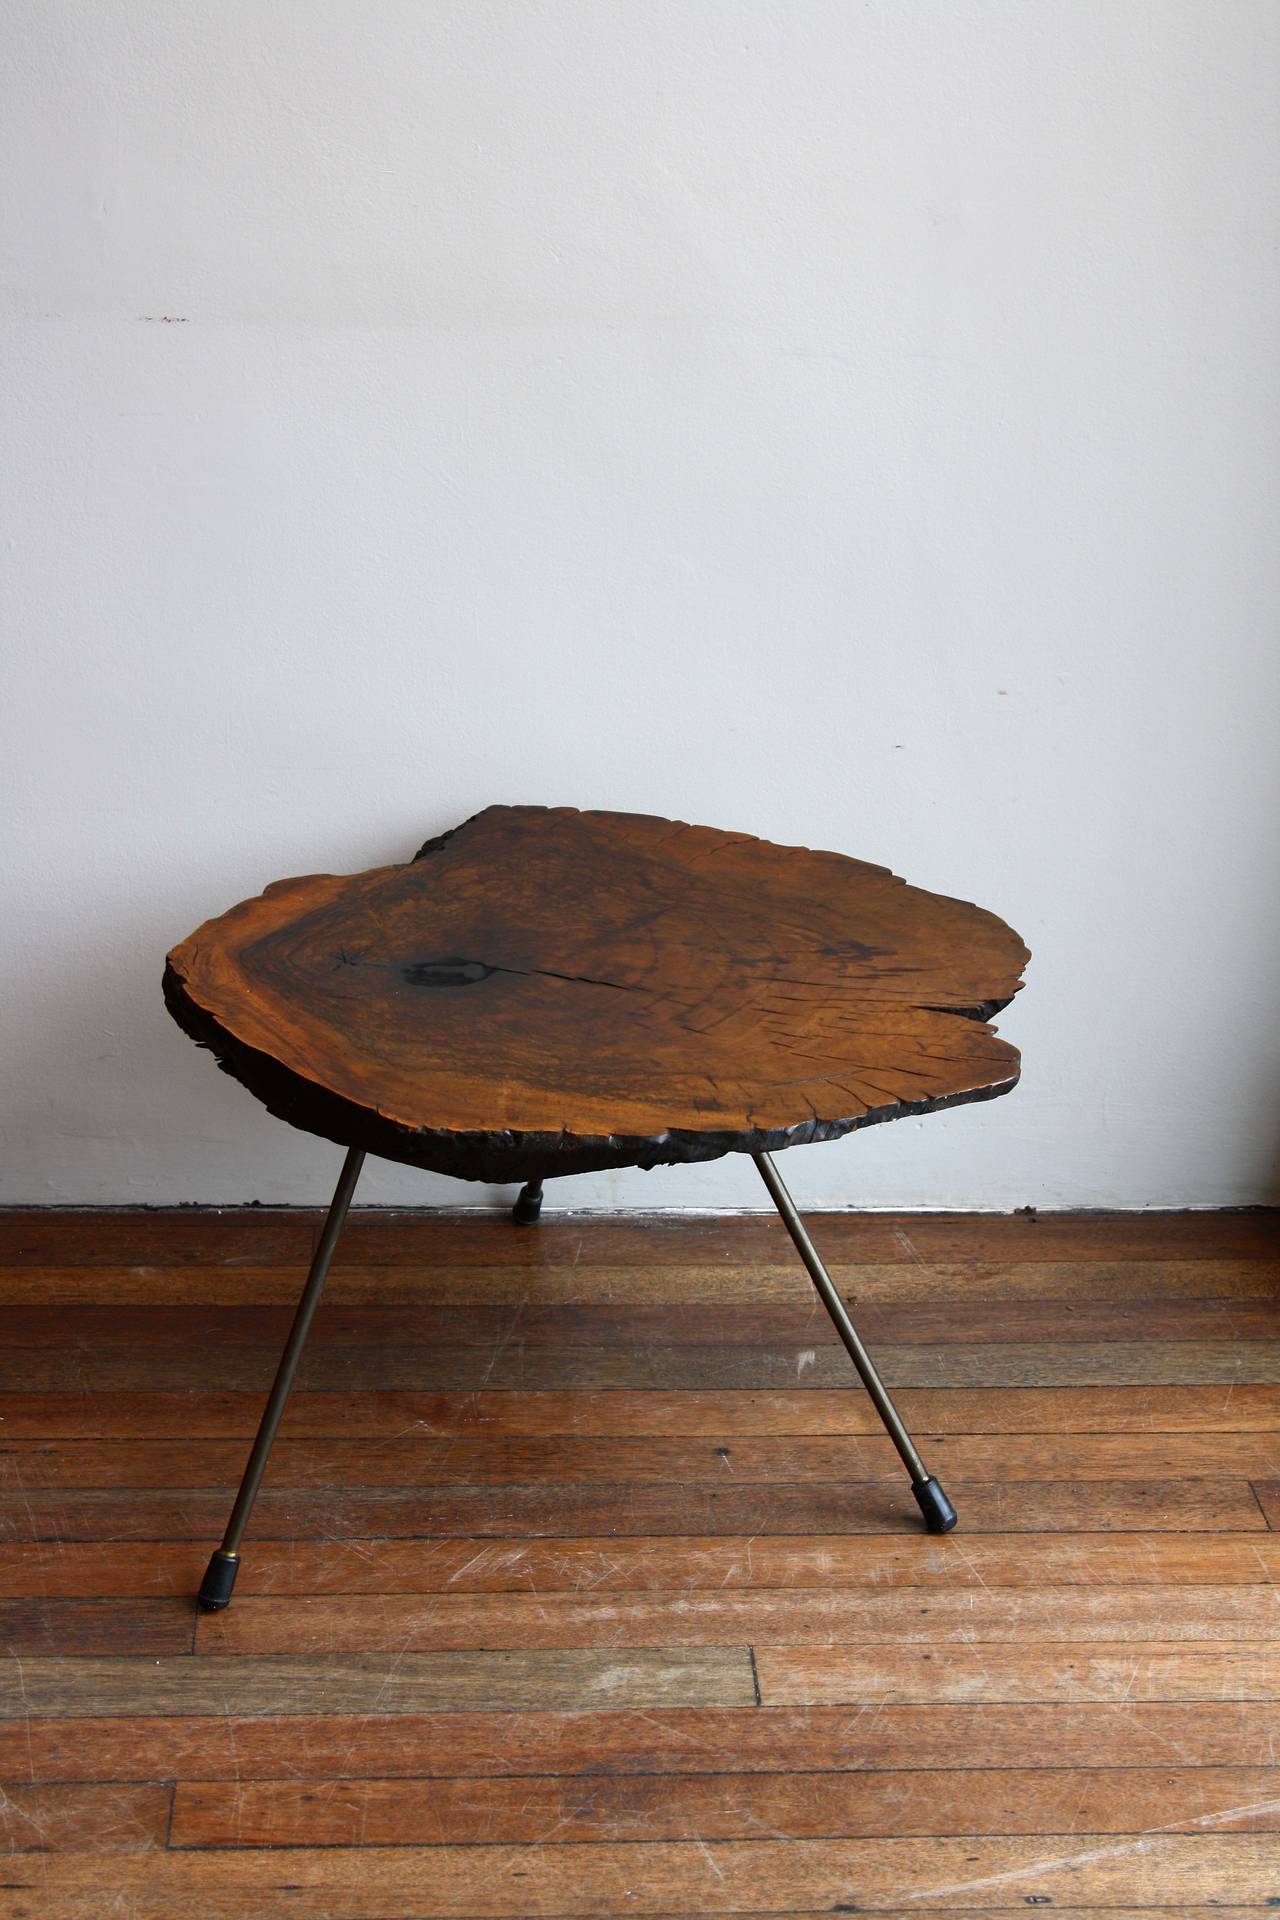 Fantastic round tree trunk table from the series of the unique table made by Aubock in the 1940s and 50s. Great strong example